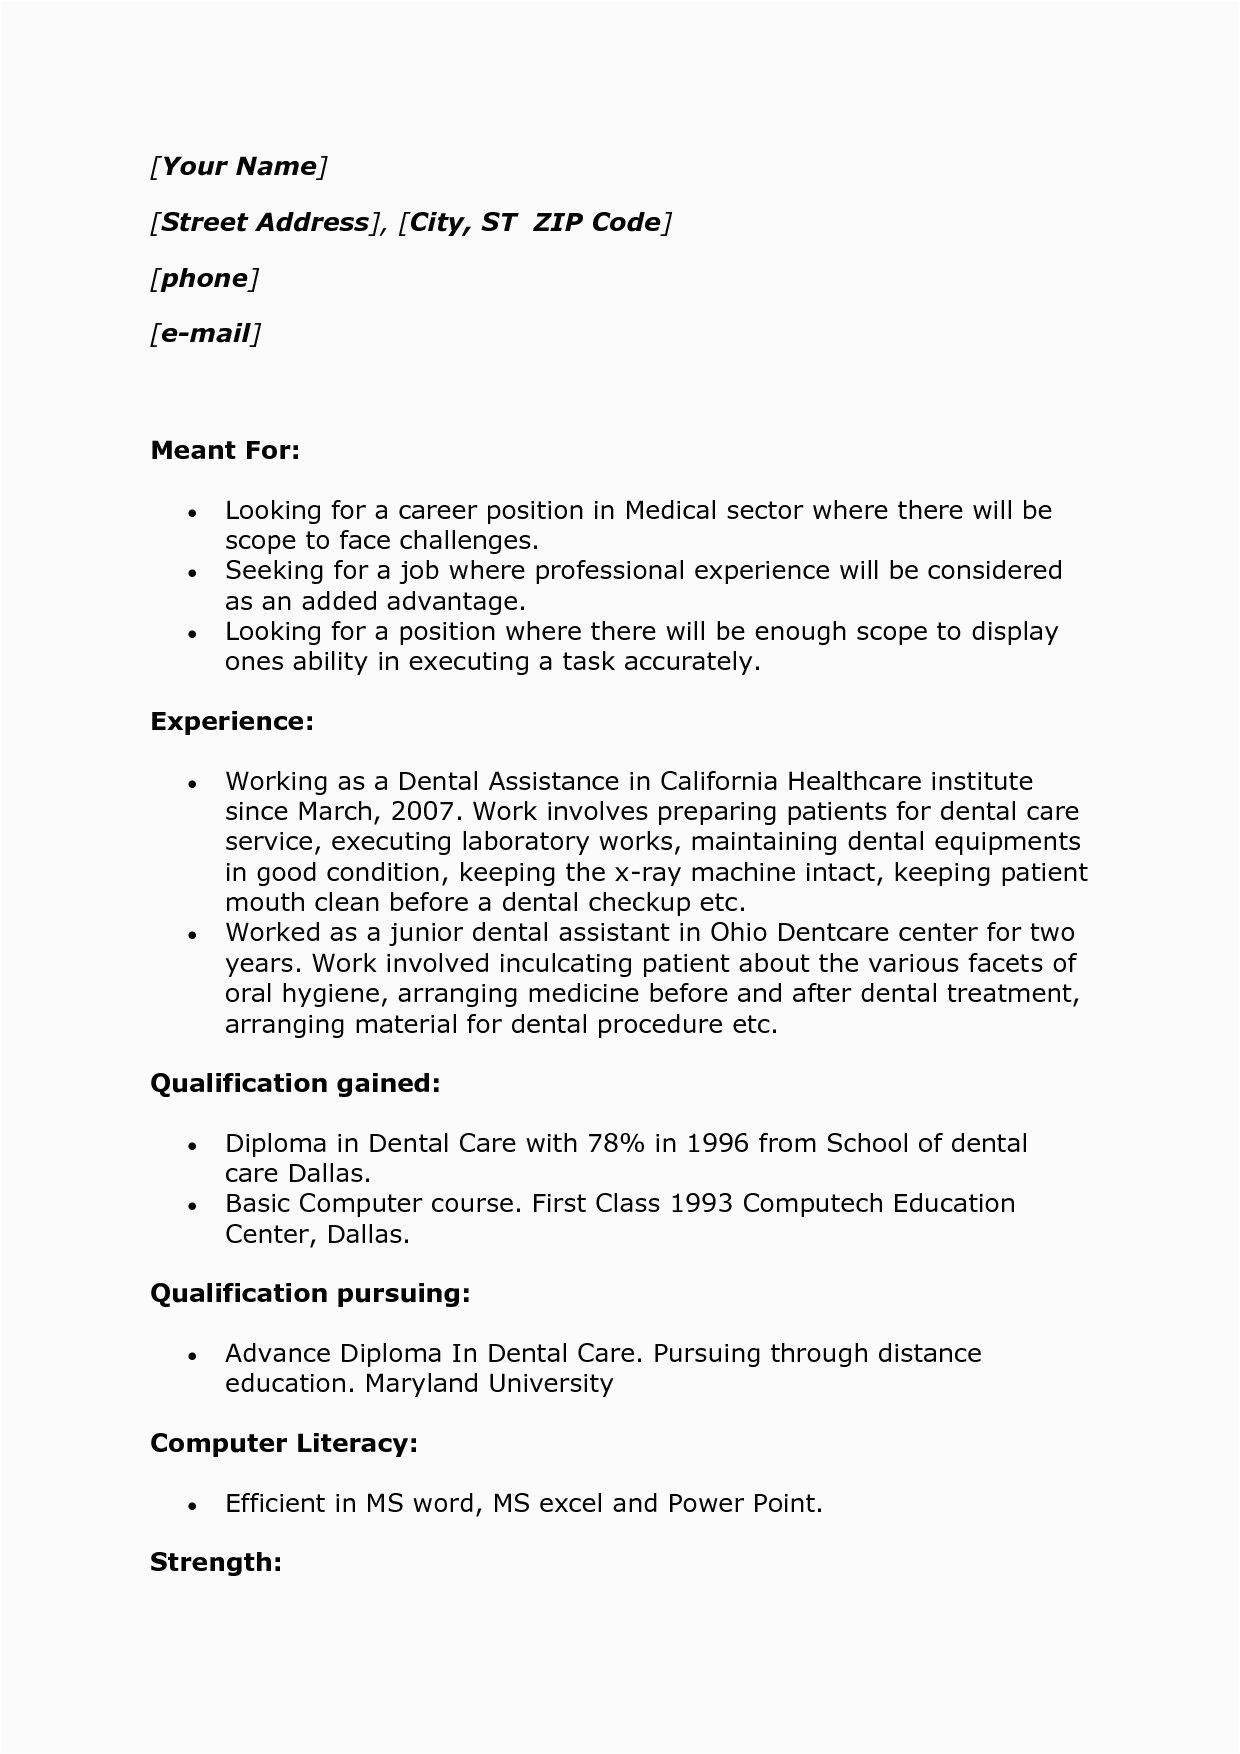 First Time Teacher Resume with No Experience Samples Teacher Resume No Experience Sample